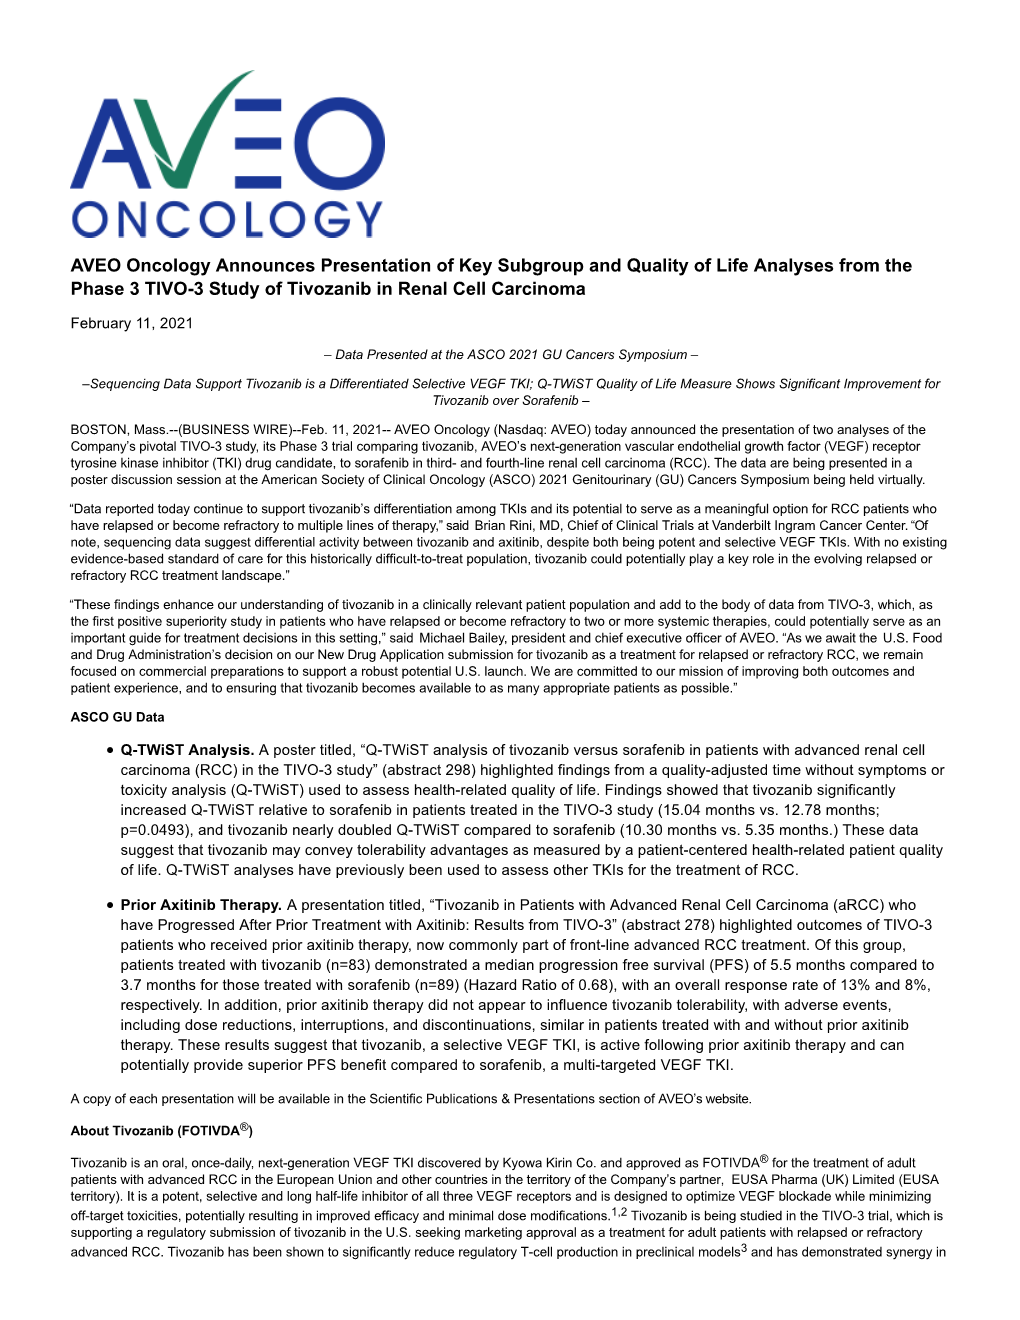 AVEO Oncology Announces Presentation of Key Subgroup and Quality of Life Analyses from the Phase 3 TIVO-3 Study of Tivozanib in Renal Cell Carcinoma